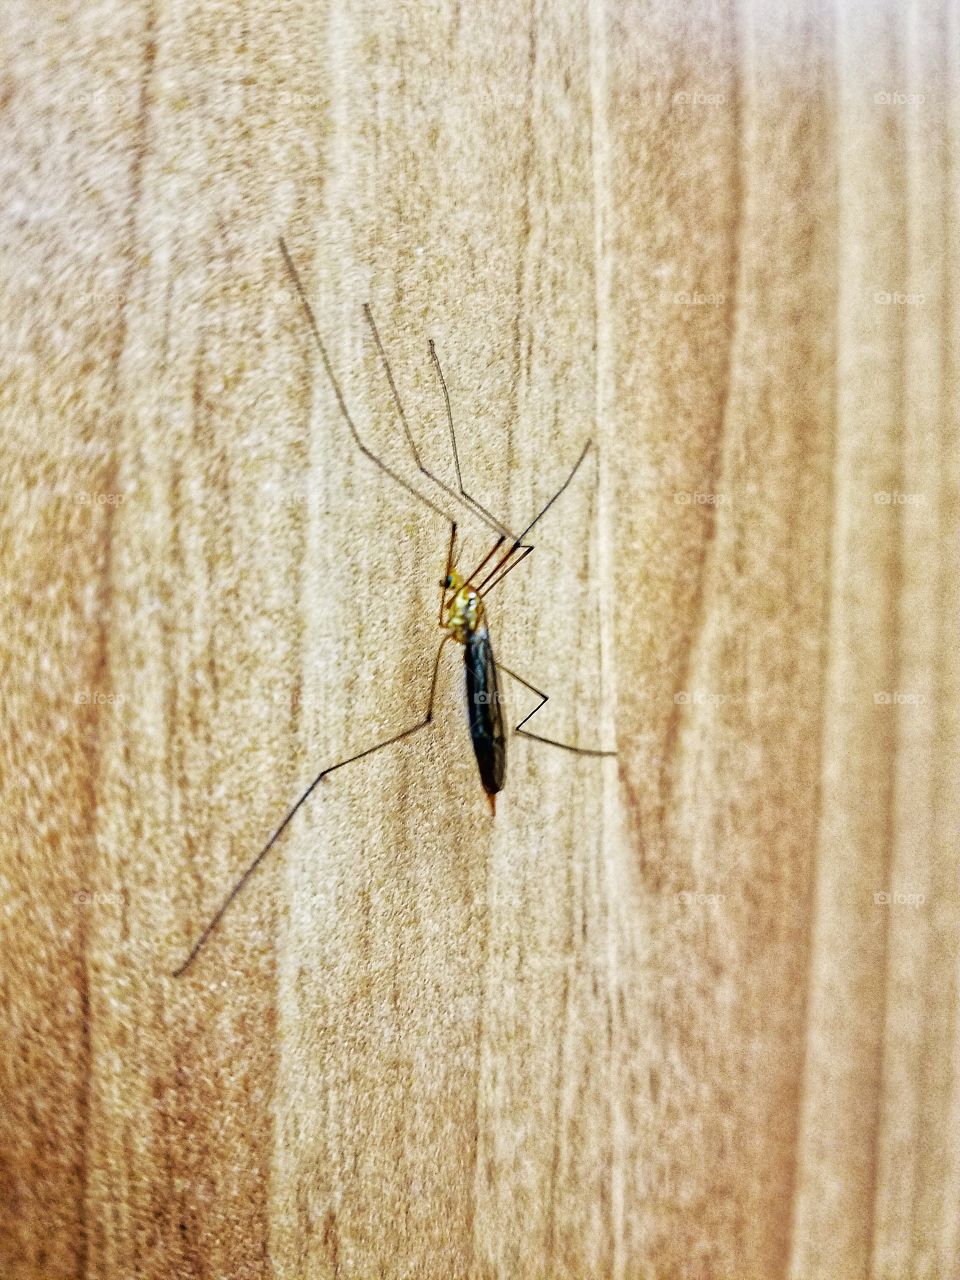 Mosquito on the Wall